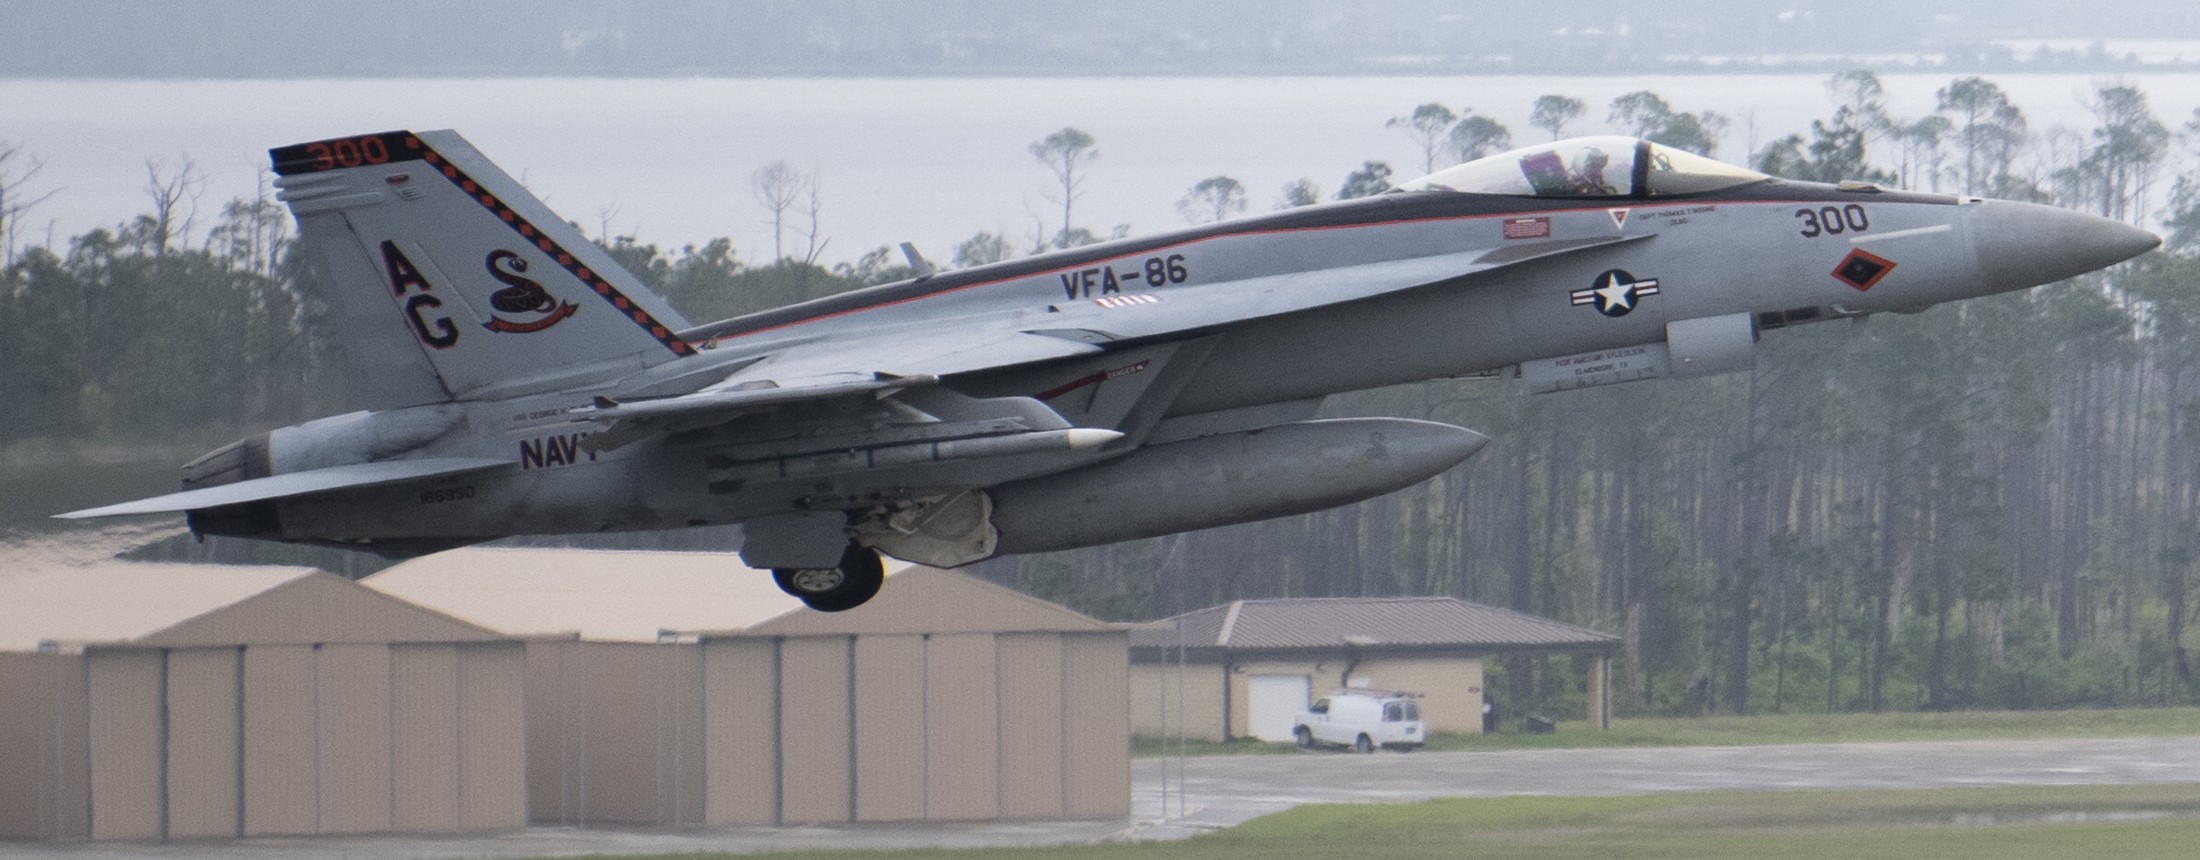 vfa-86 sidewinders strike fighter squadron f/a-18e super hornet us navy exercise checkered flag tyndall afb florida 73